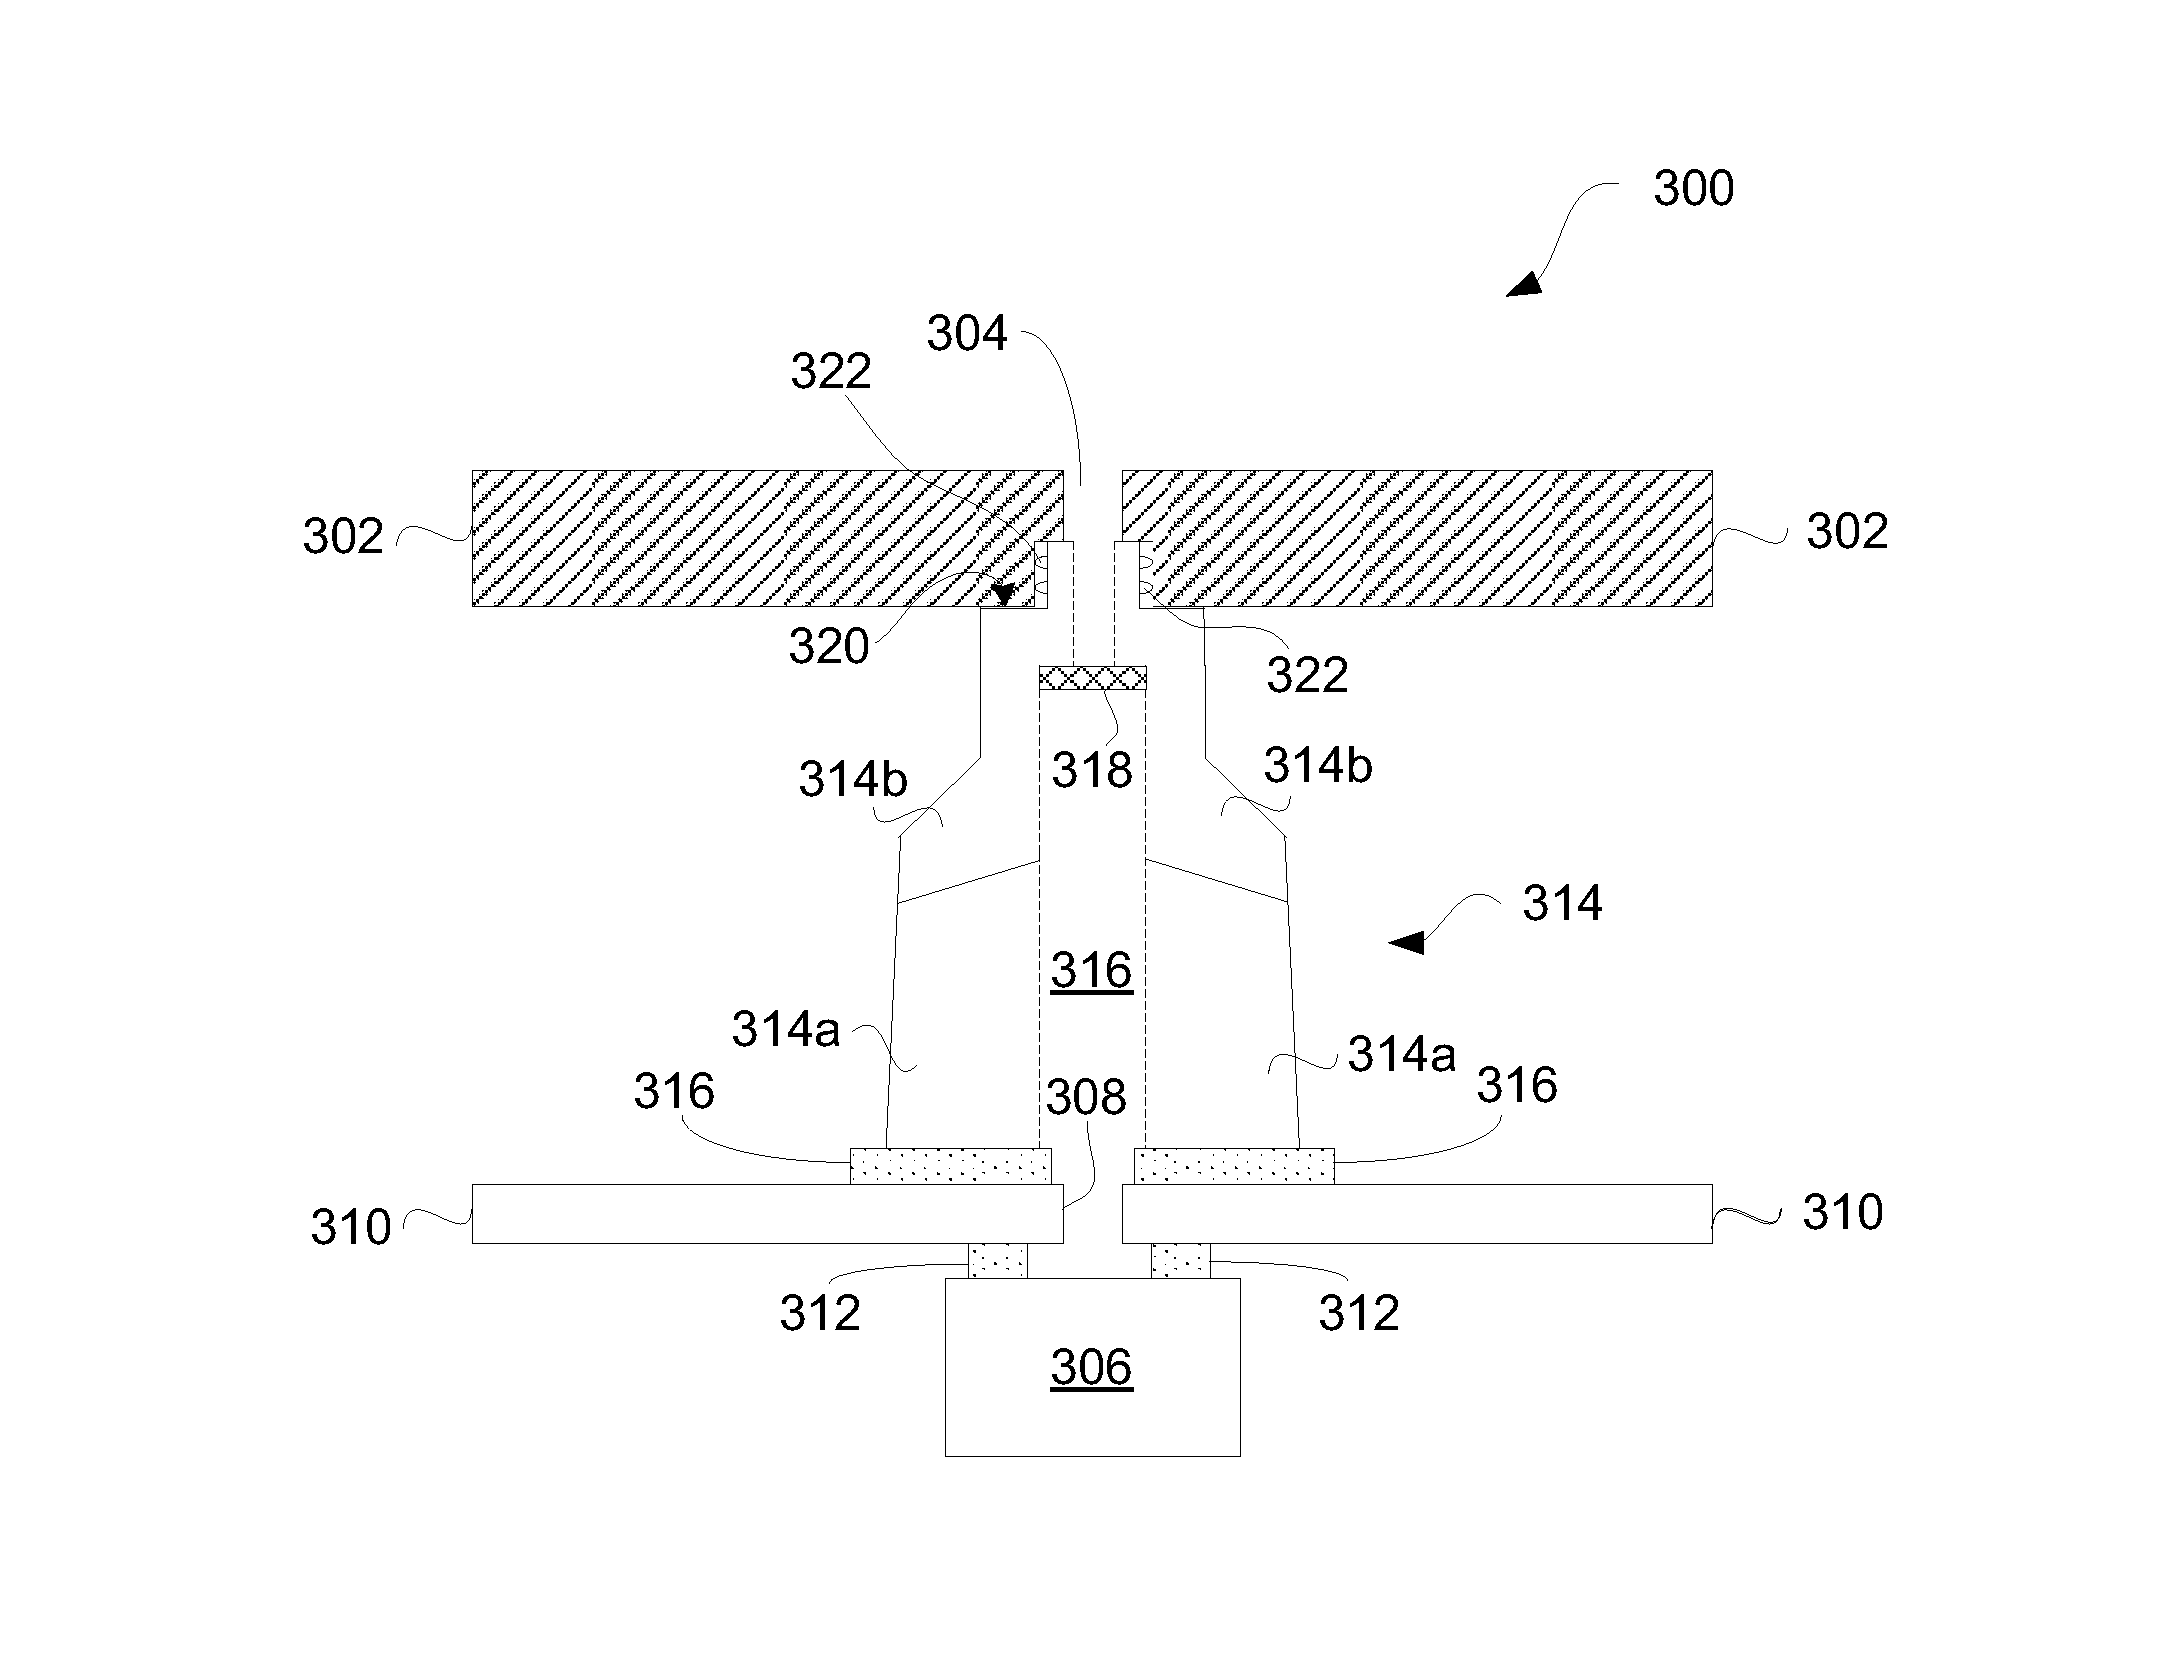 Audio port configuration for compact electronic devices